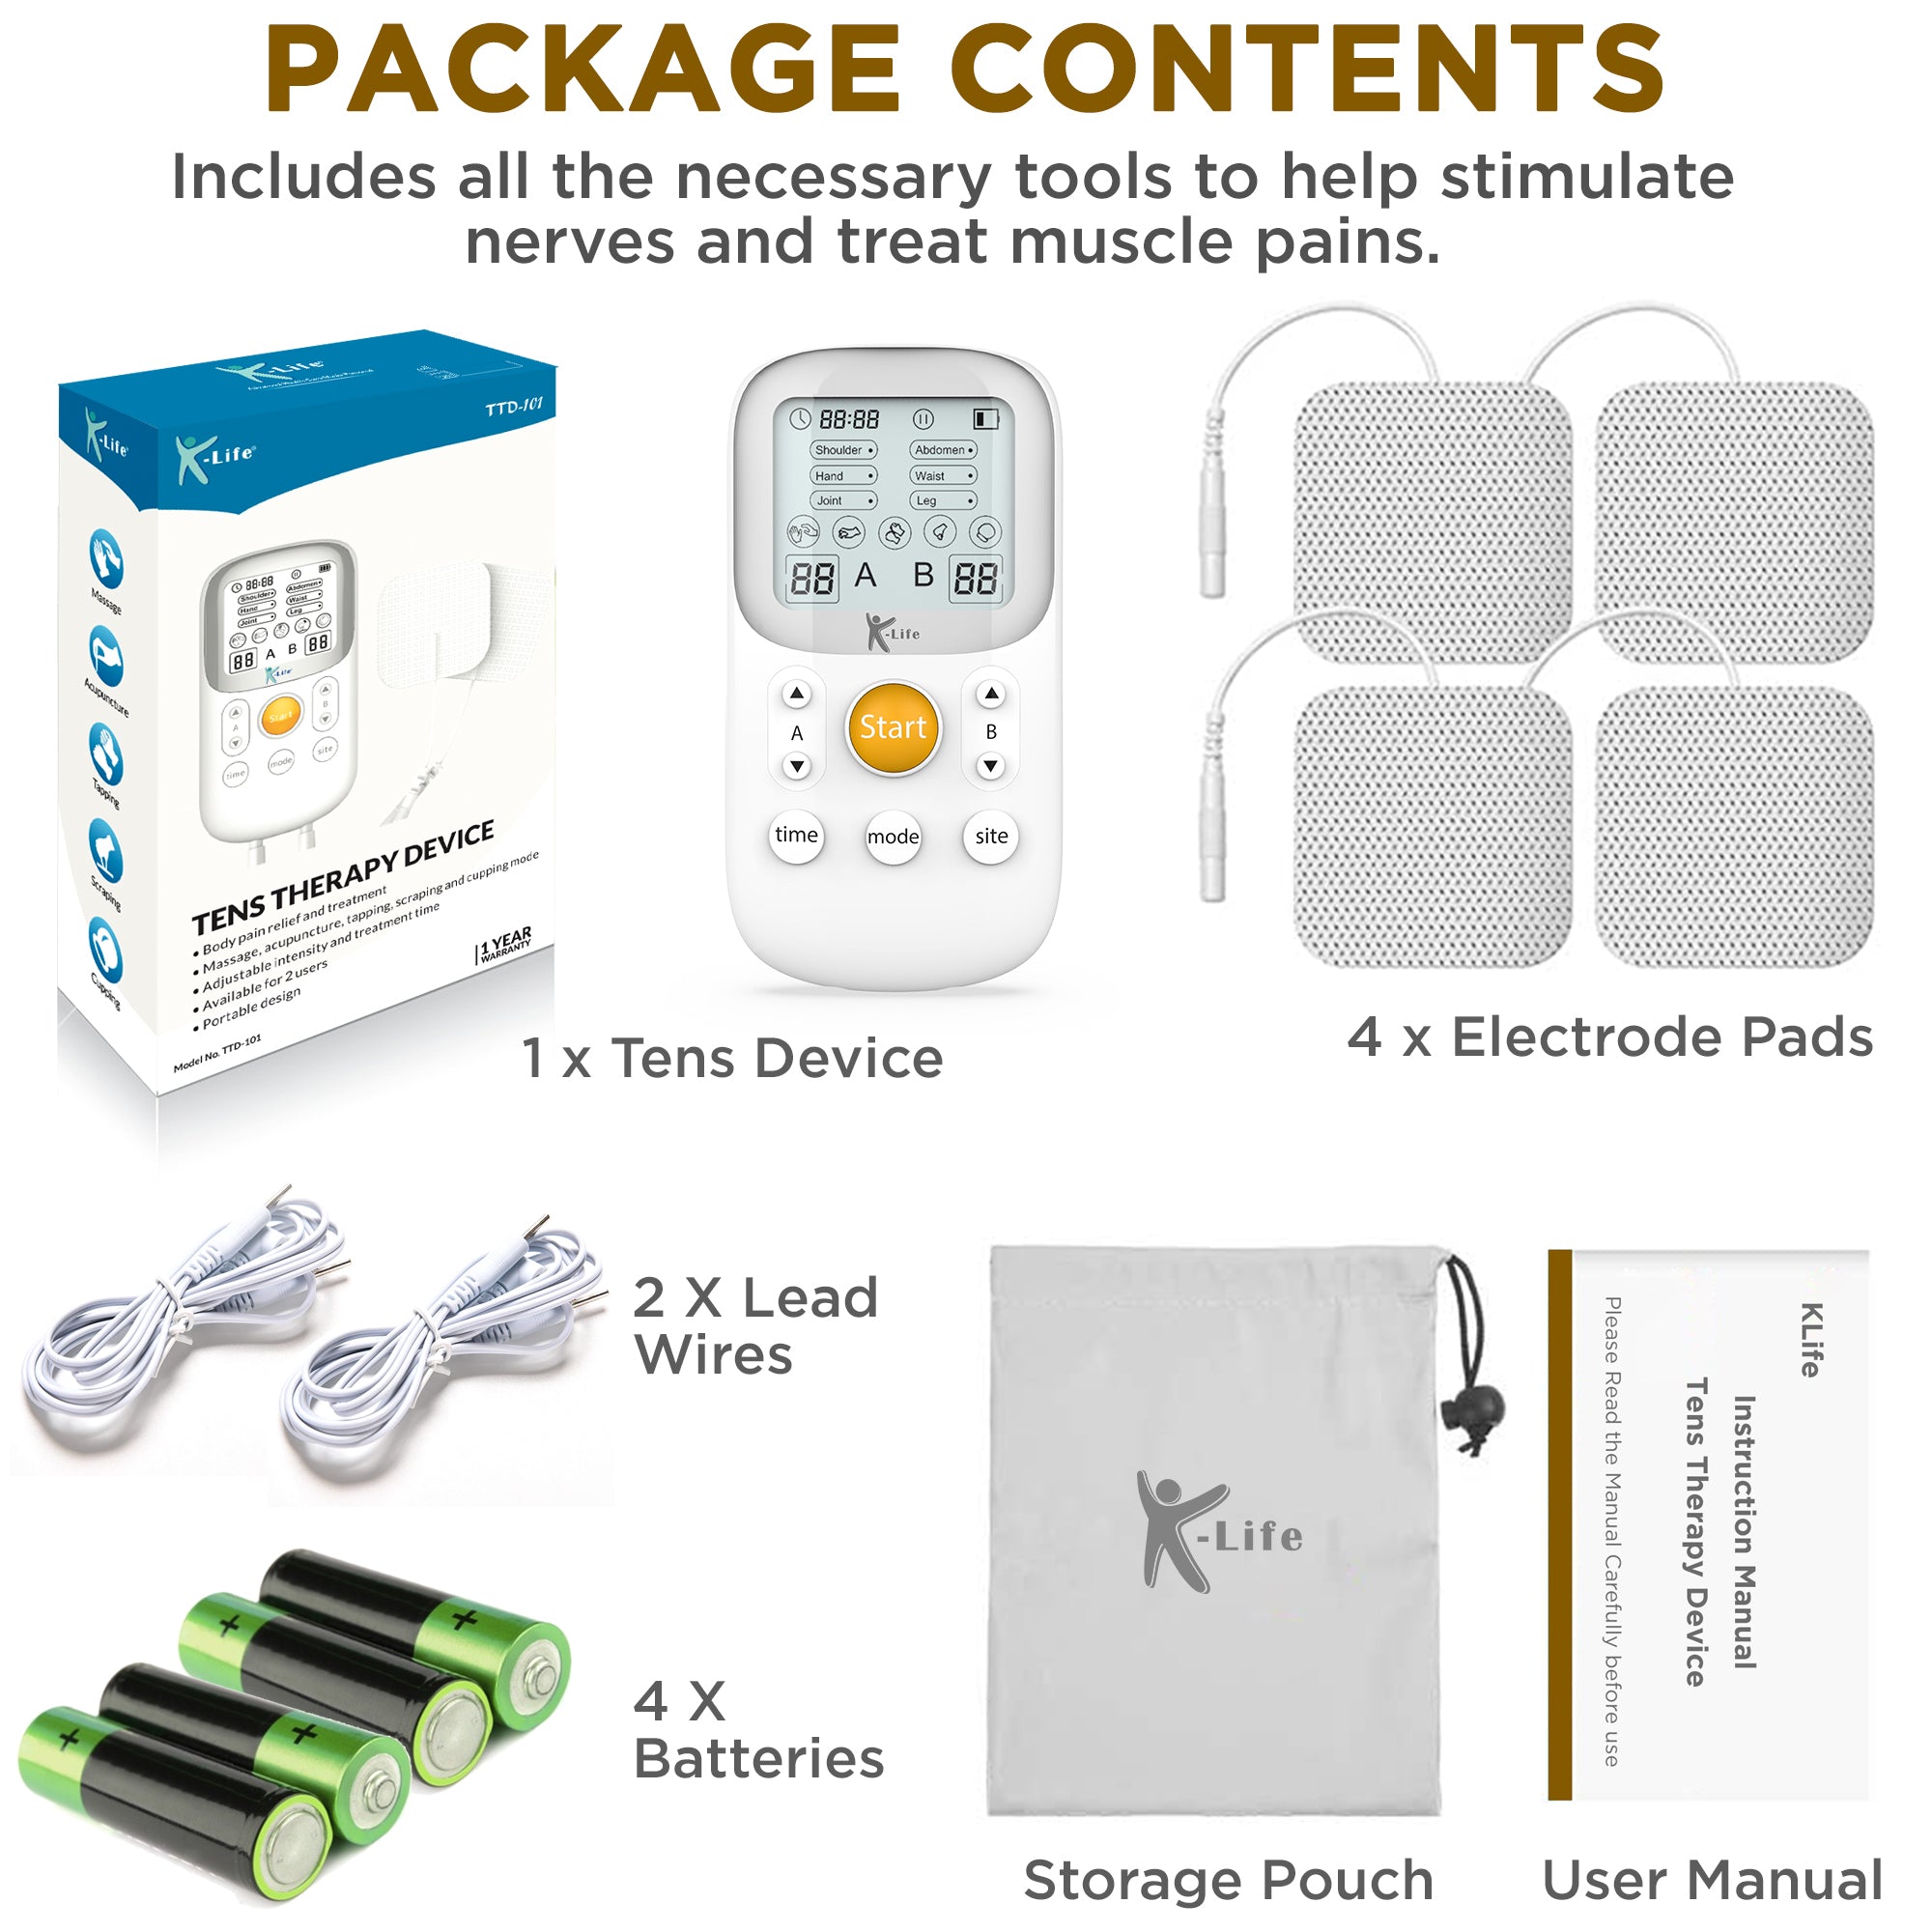 K-Life Ttd-101 Tens Therapy Device Battery Powered Electronic Nerve Simulator And Massager for Blood Circulation (White)